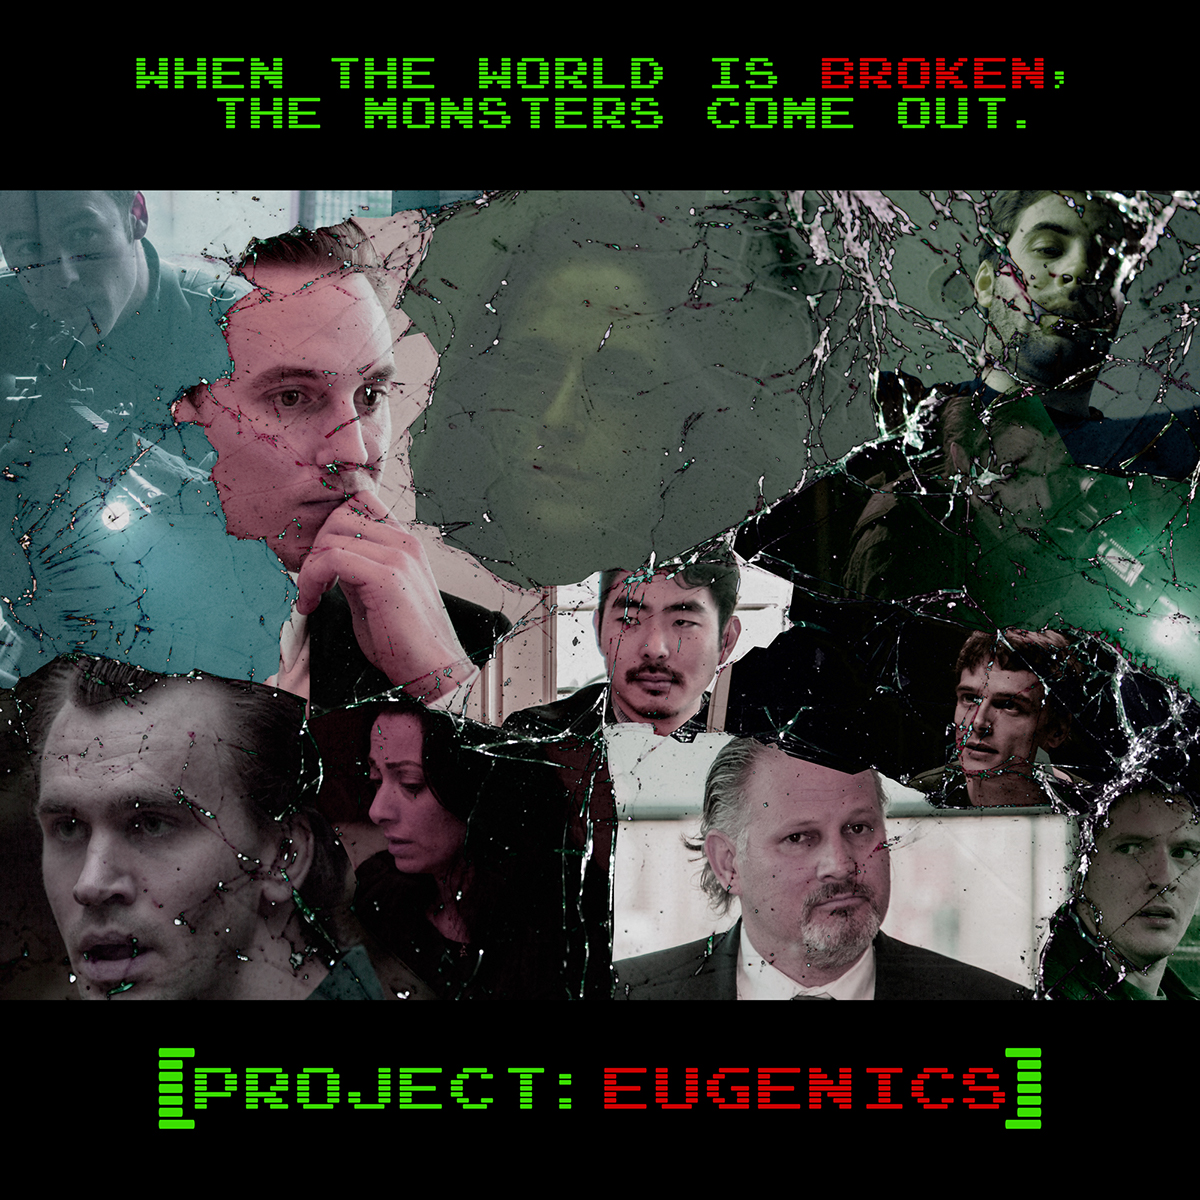 zombie feature movie Project eugenics horror